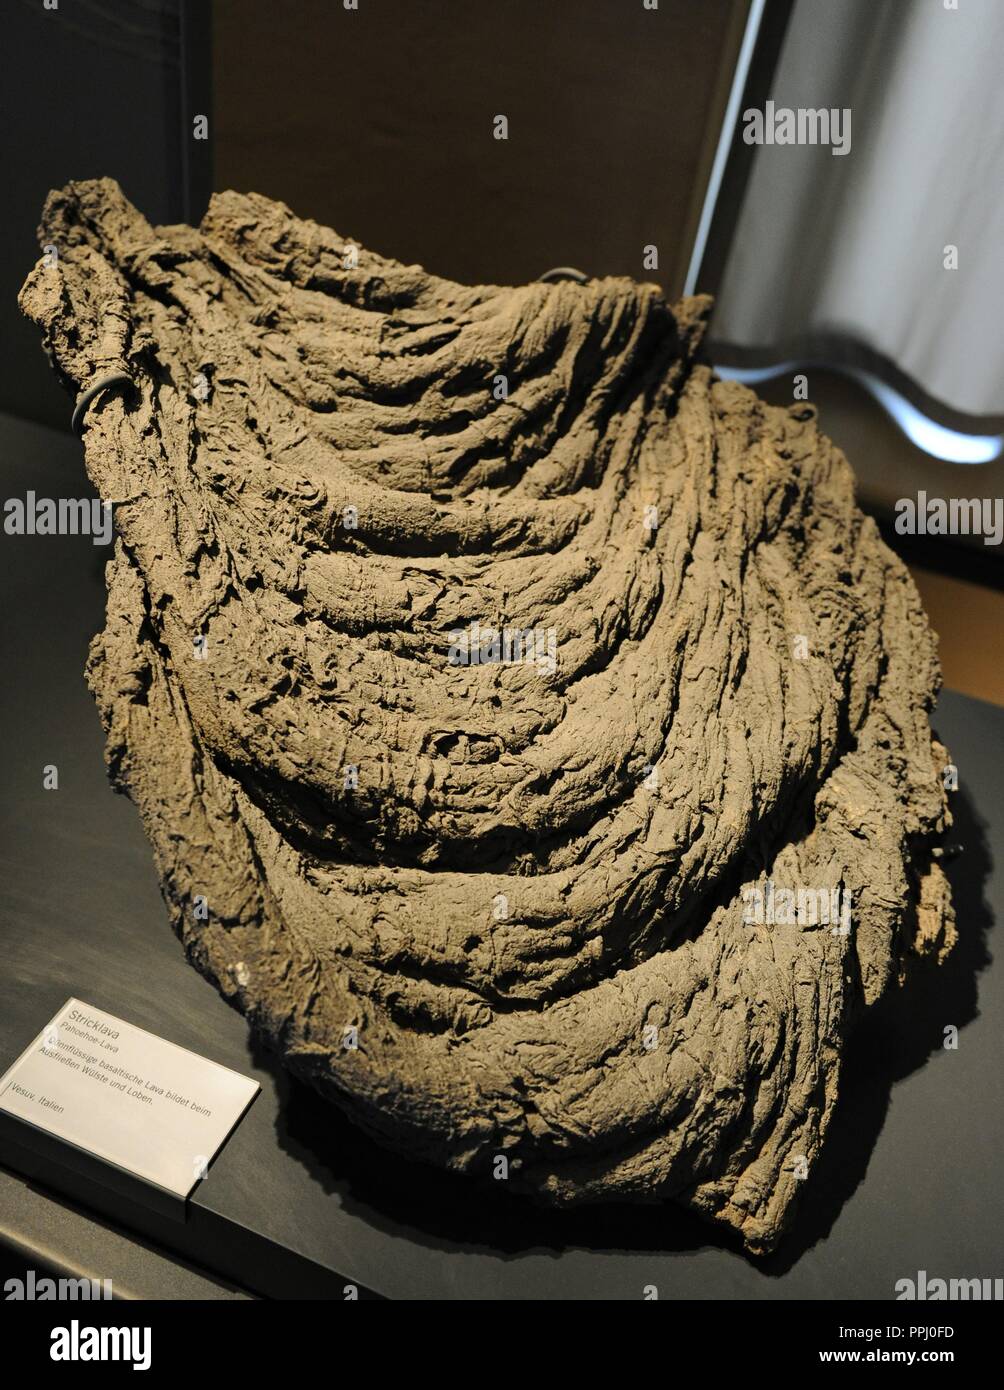 Fluid lava emitted by a volcano during its eruptions. Exemplary lava flow of the Pahoehoe type or cordaba, from Vesuvius, Italy. Generally of Basaltic lavas. Museum fur Naturkunde. Berlin. Germany. Europe. Stock Photo